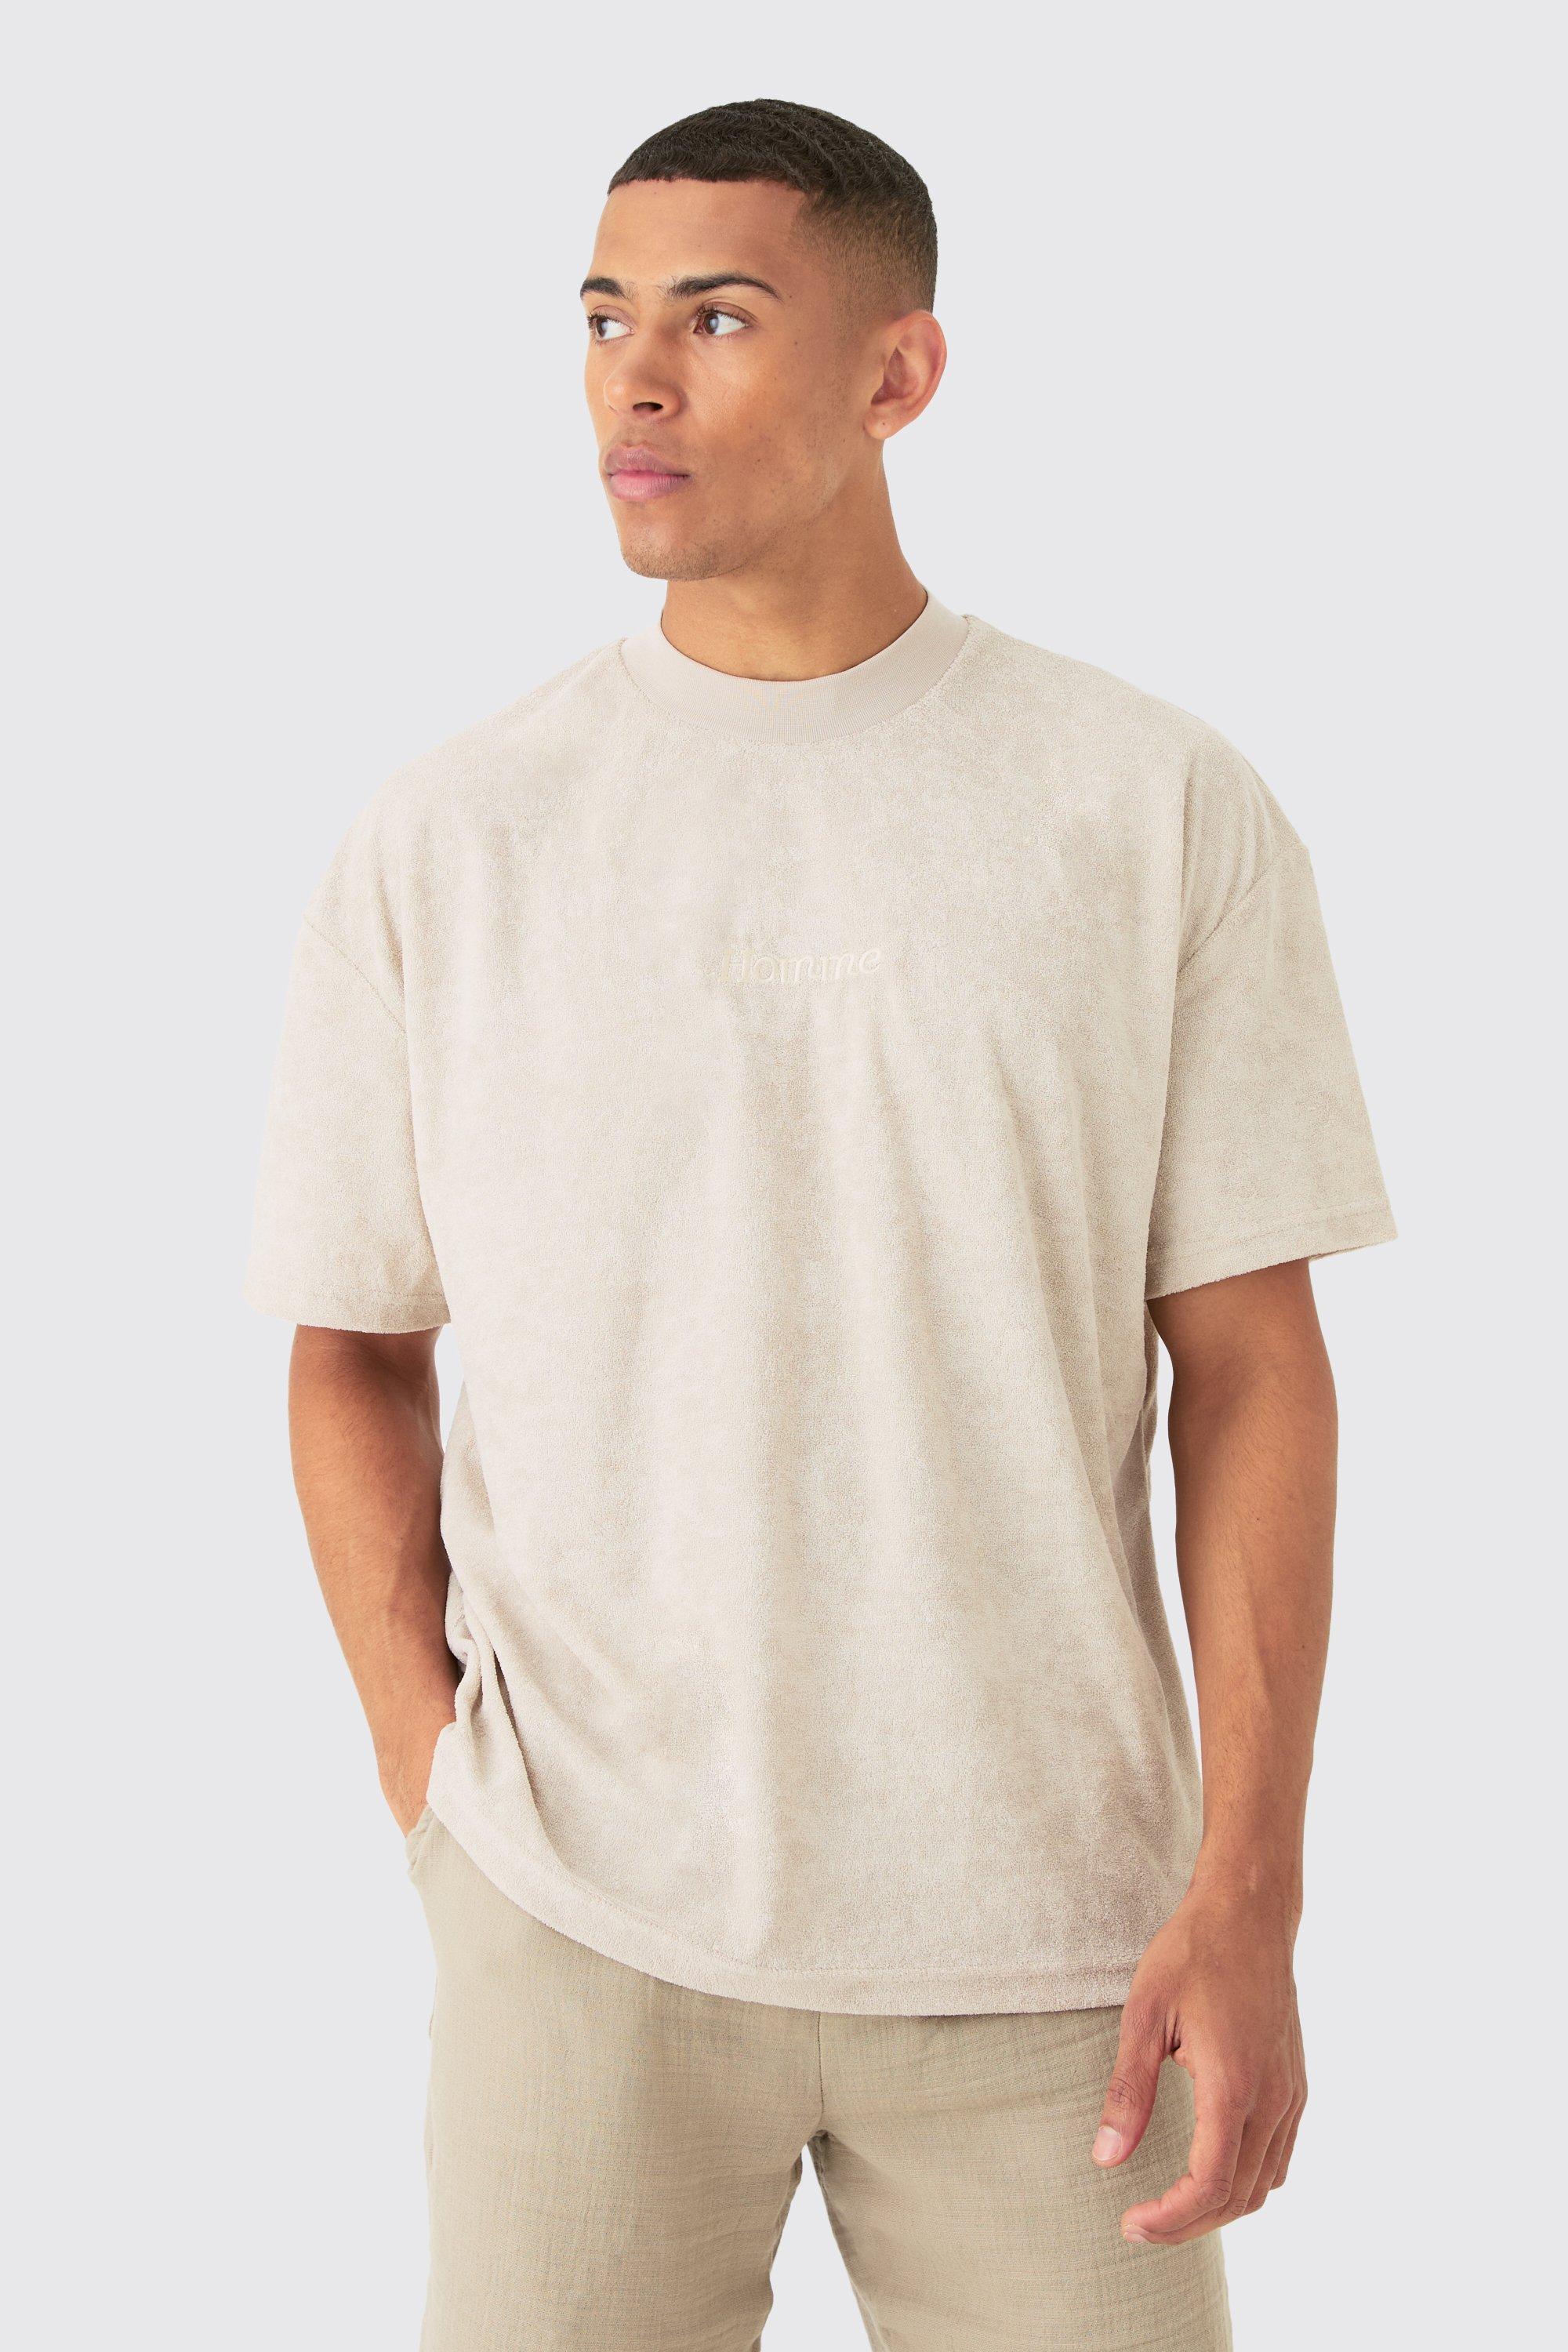 Image of Oversized Extended Neck Towelling Homme T-shirt, Beige